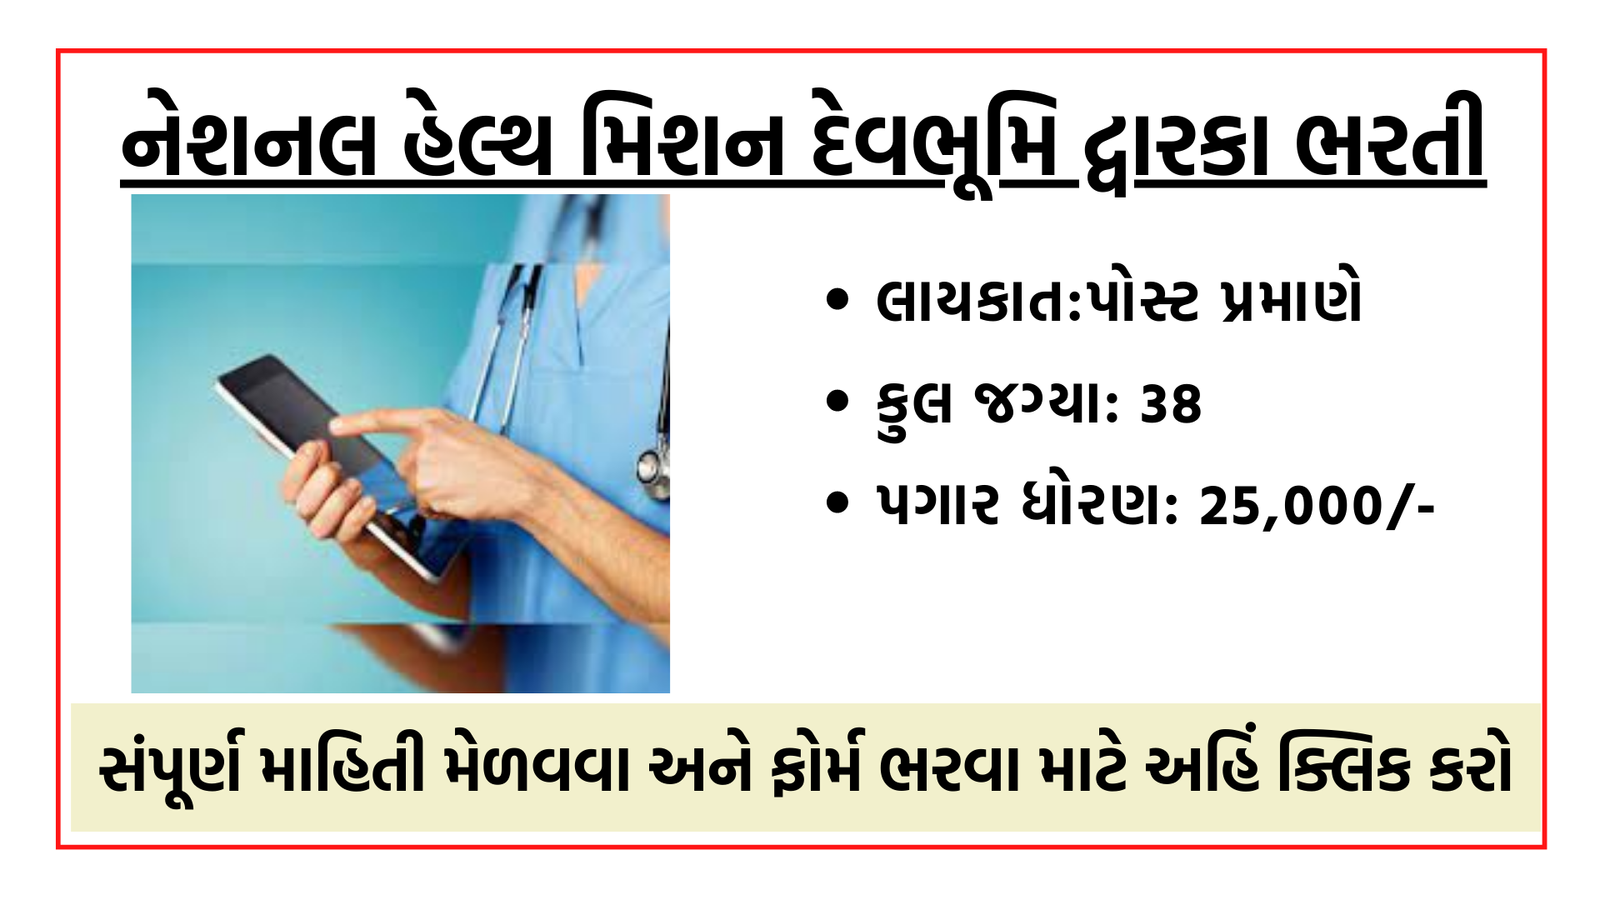 National Health Mission Recruitment